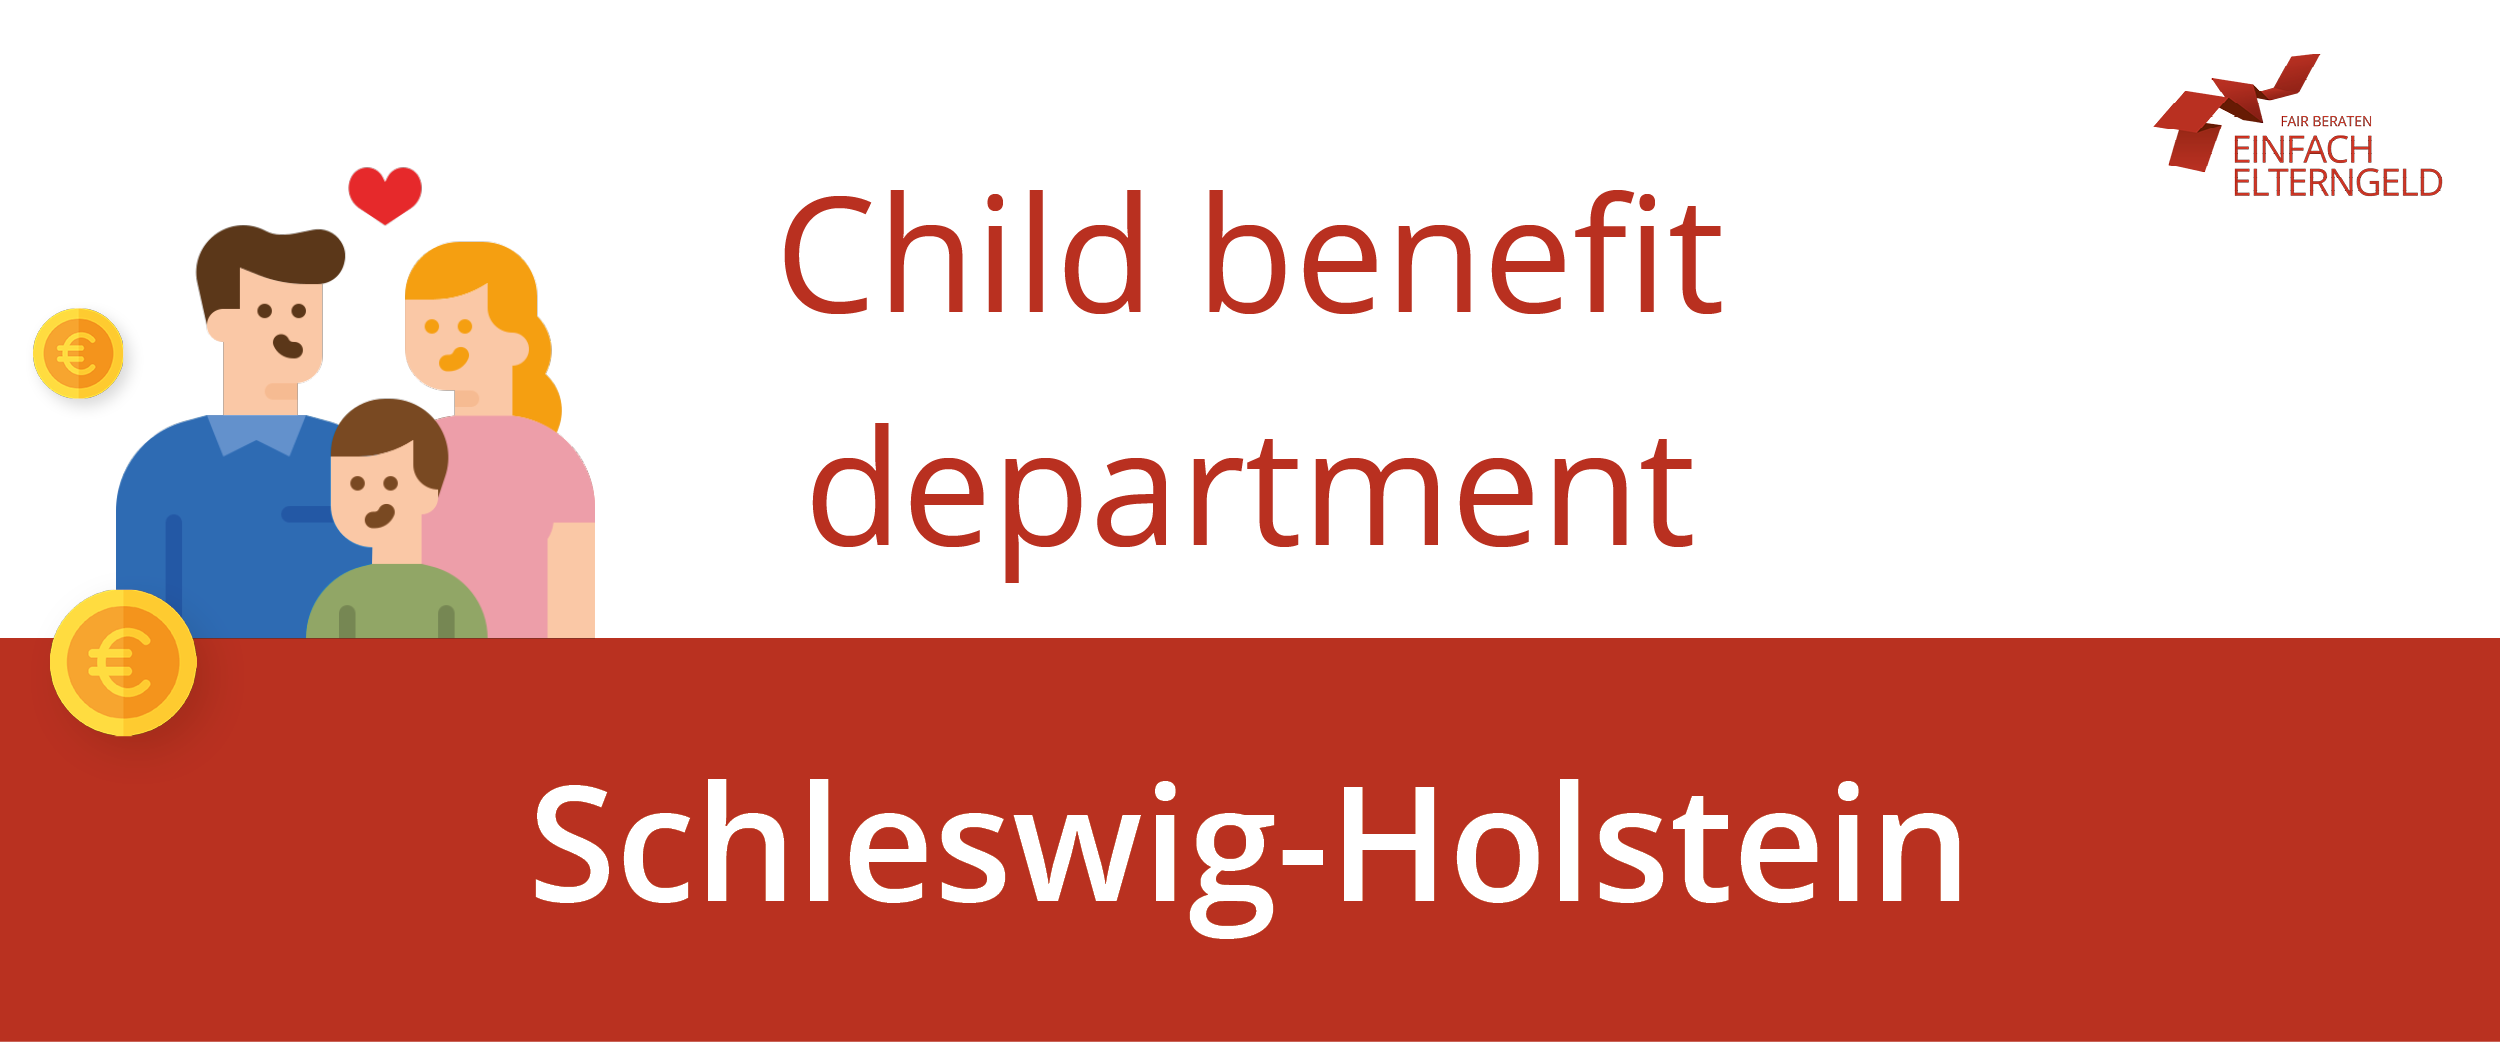 We introduce you to the child benefit department of Schleswig-Holstein.